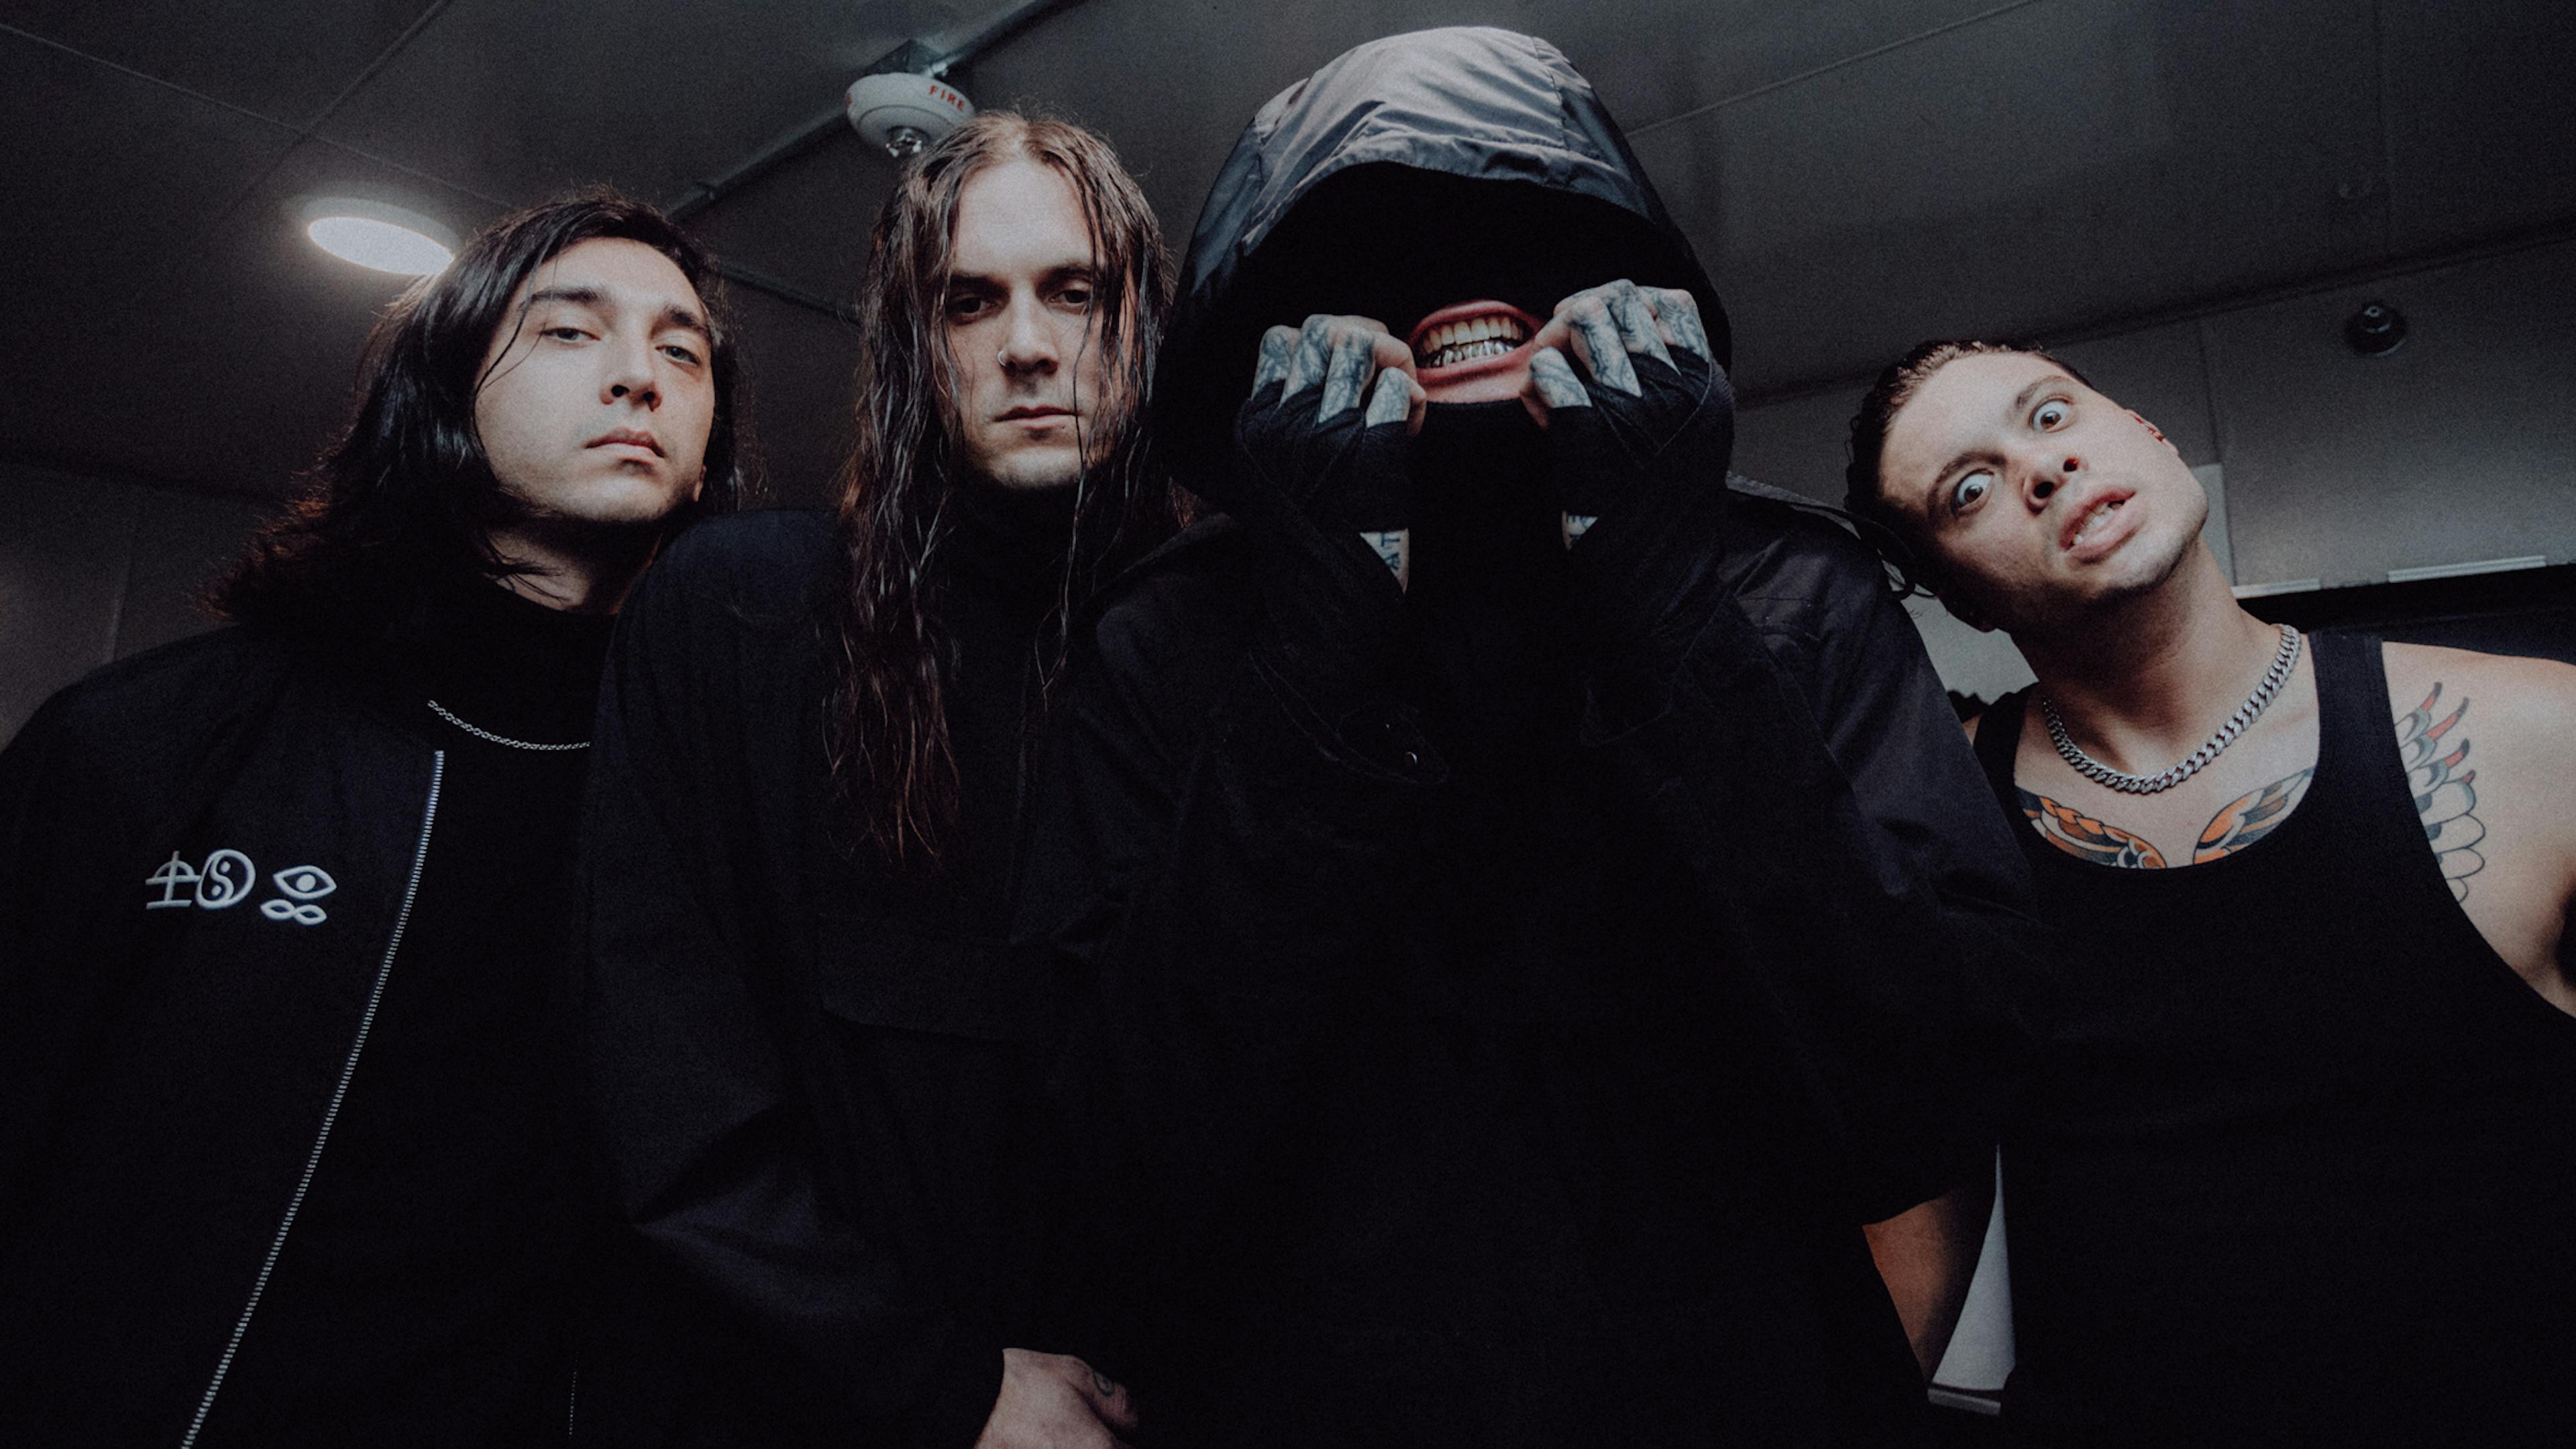 Listen to Bad Omens’ new track with HEALTH and SWARM